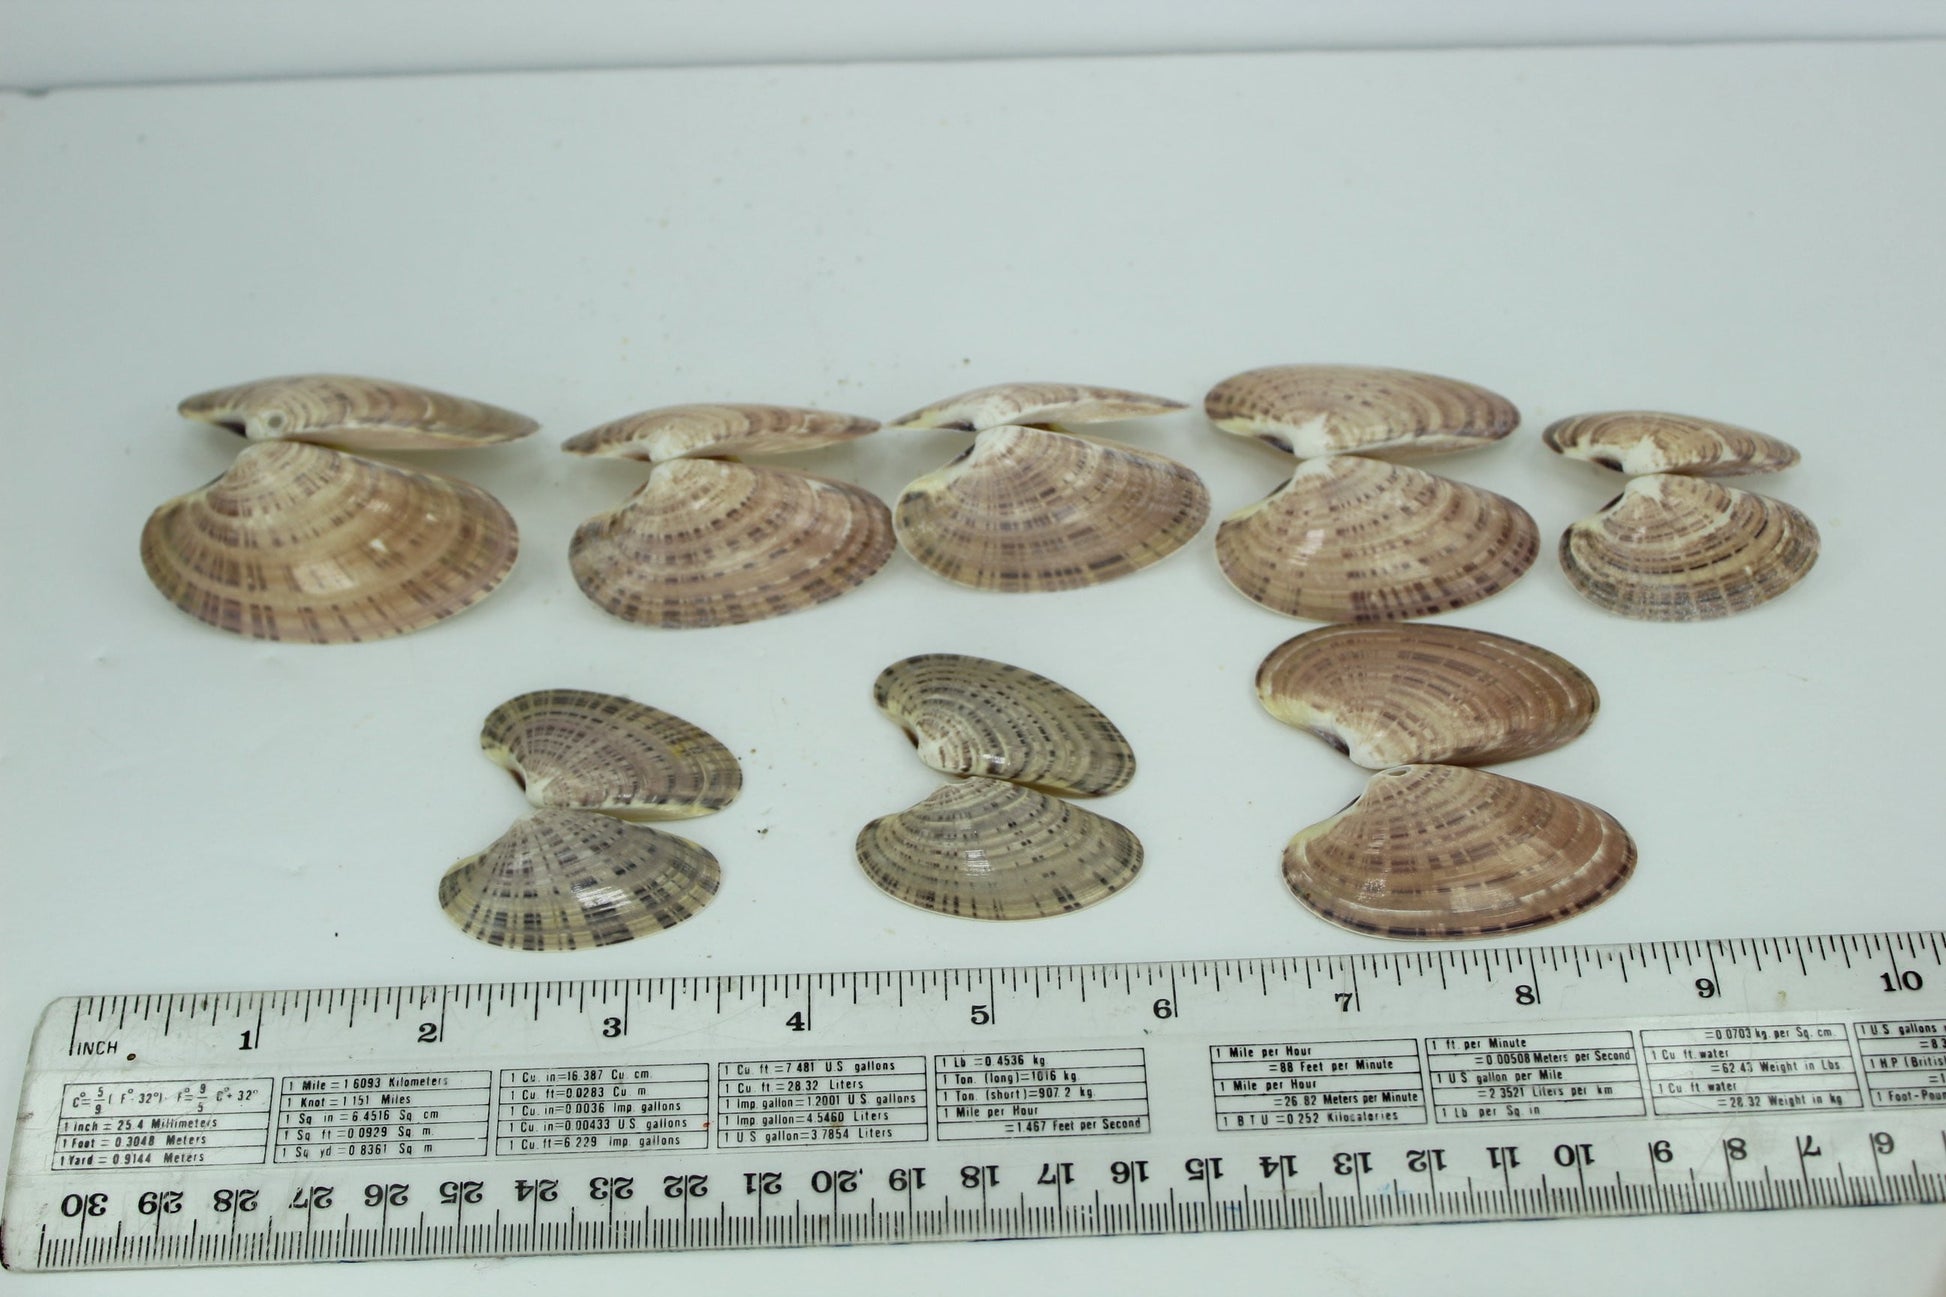 Florida Natural Shells Double Sunray Venus "Wings" Collection Crafts Jewelry wreaths